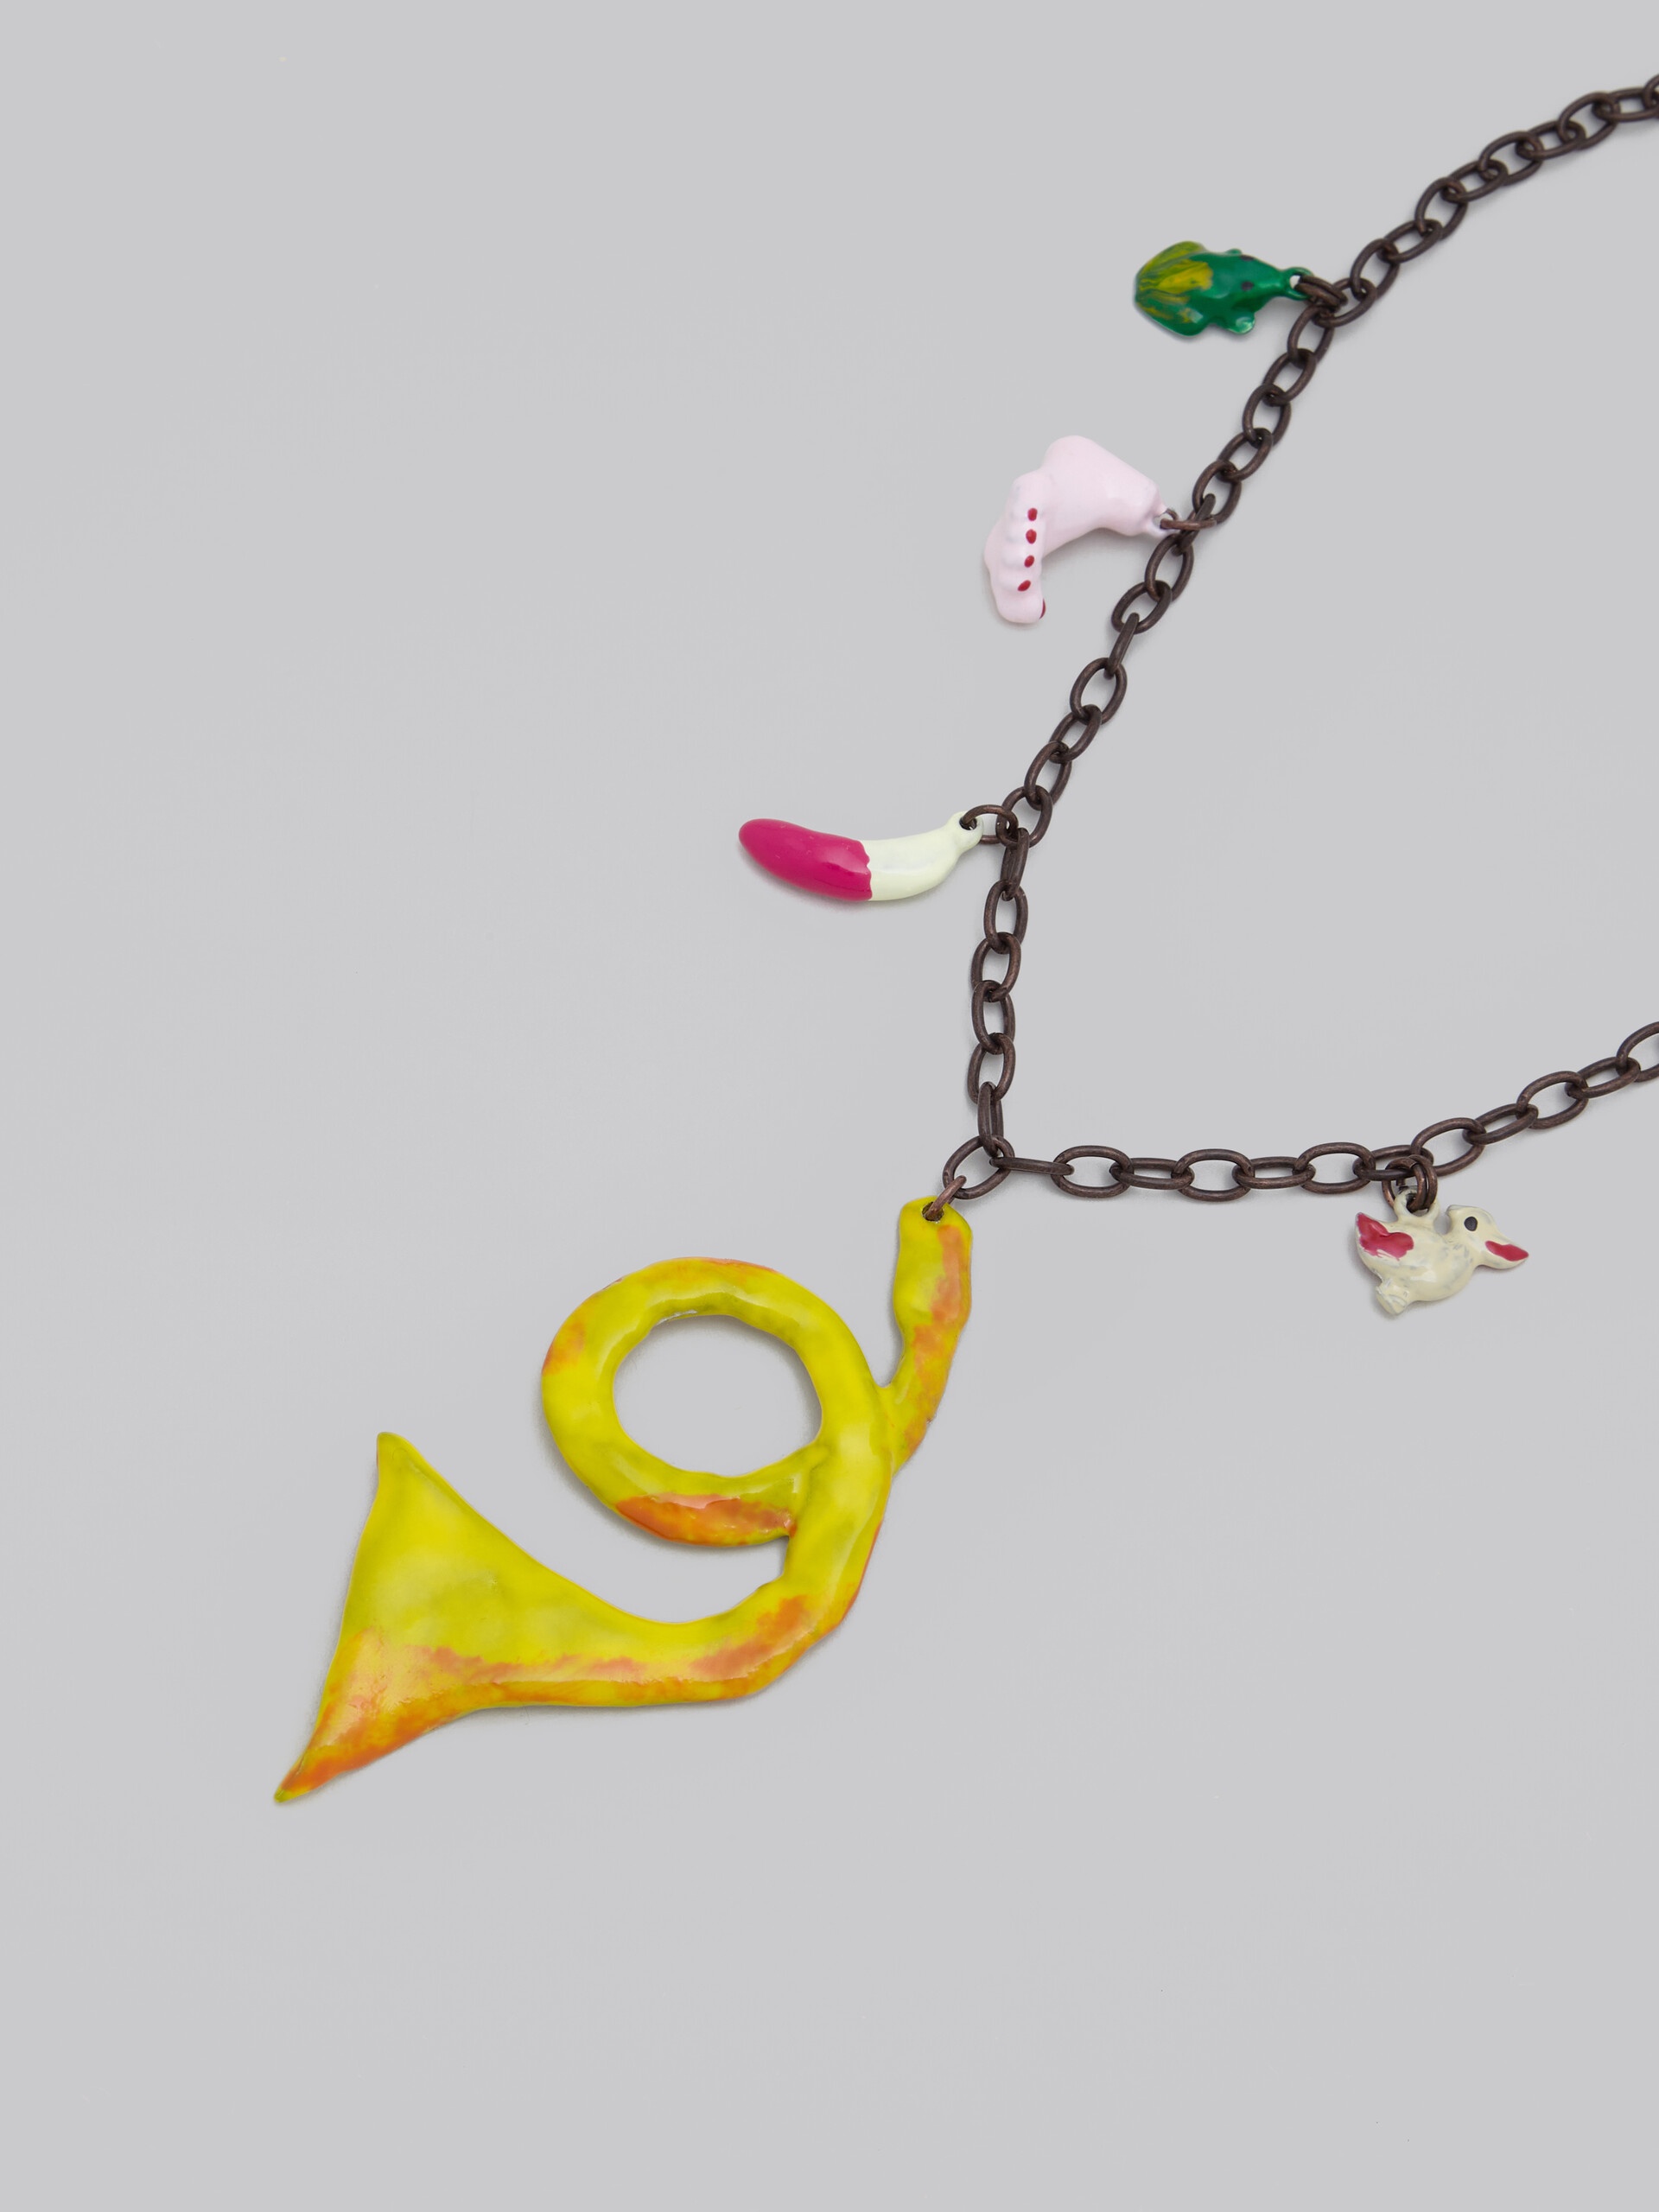 MARNI X NO VACANCY INN - NECKLACE WITH GREEN PINK AND YELLOW PENDANTS - 4